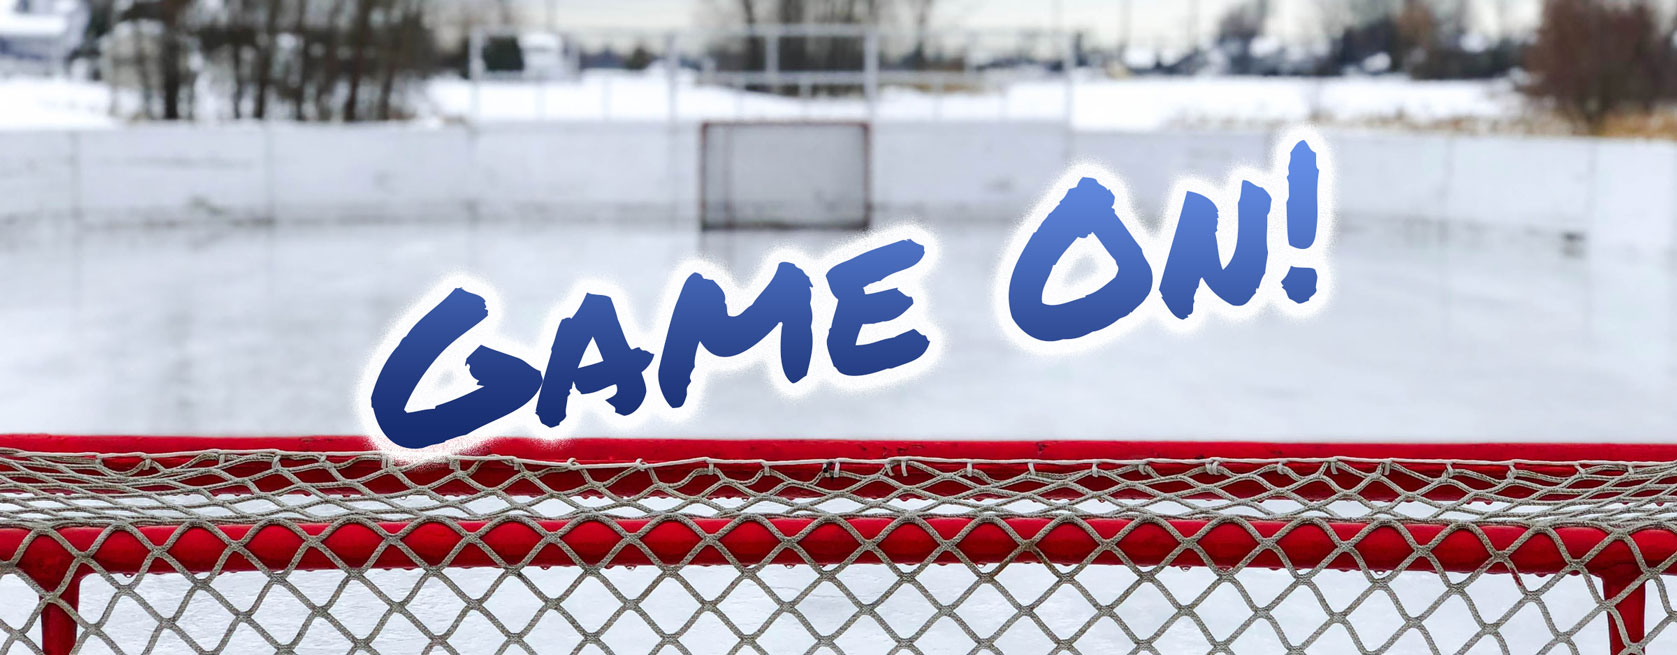 Hockey net with game on comment